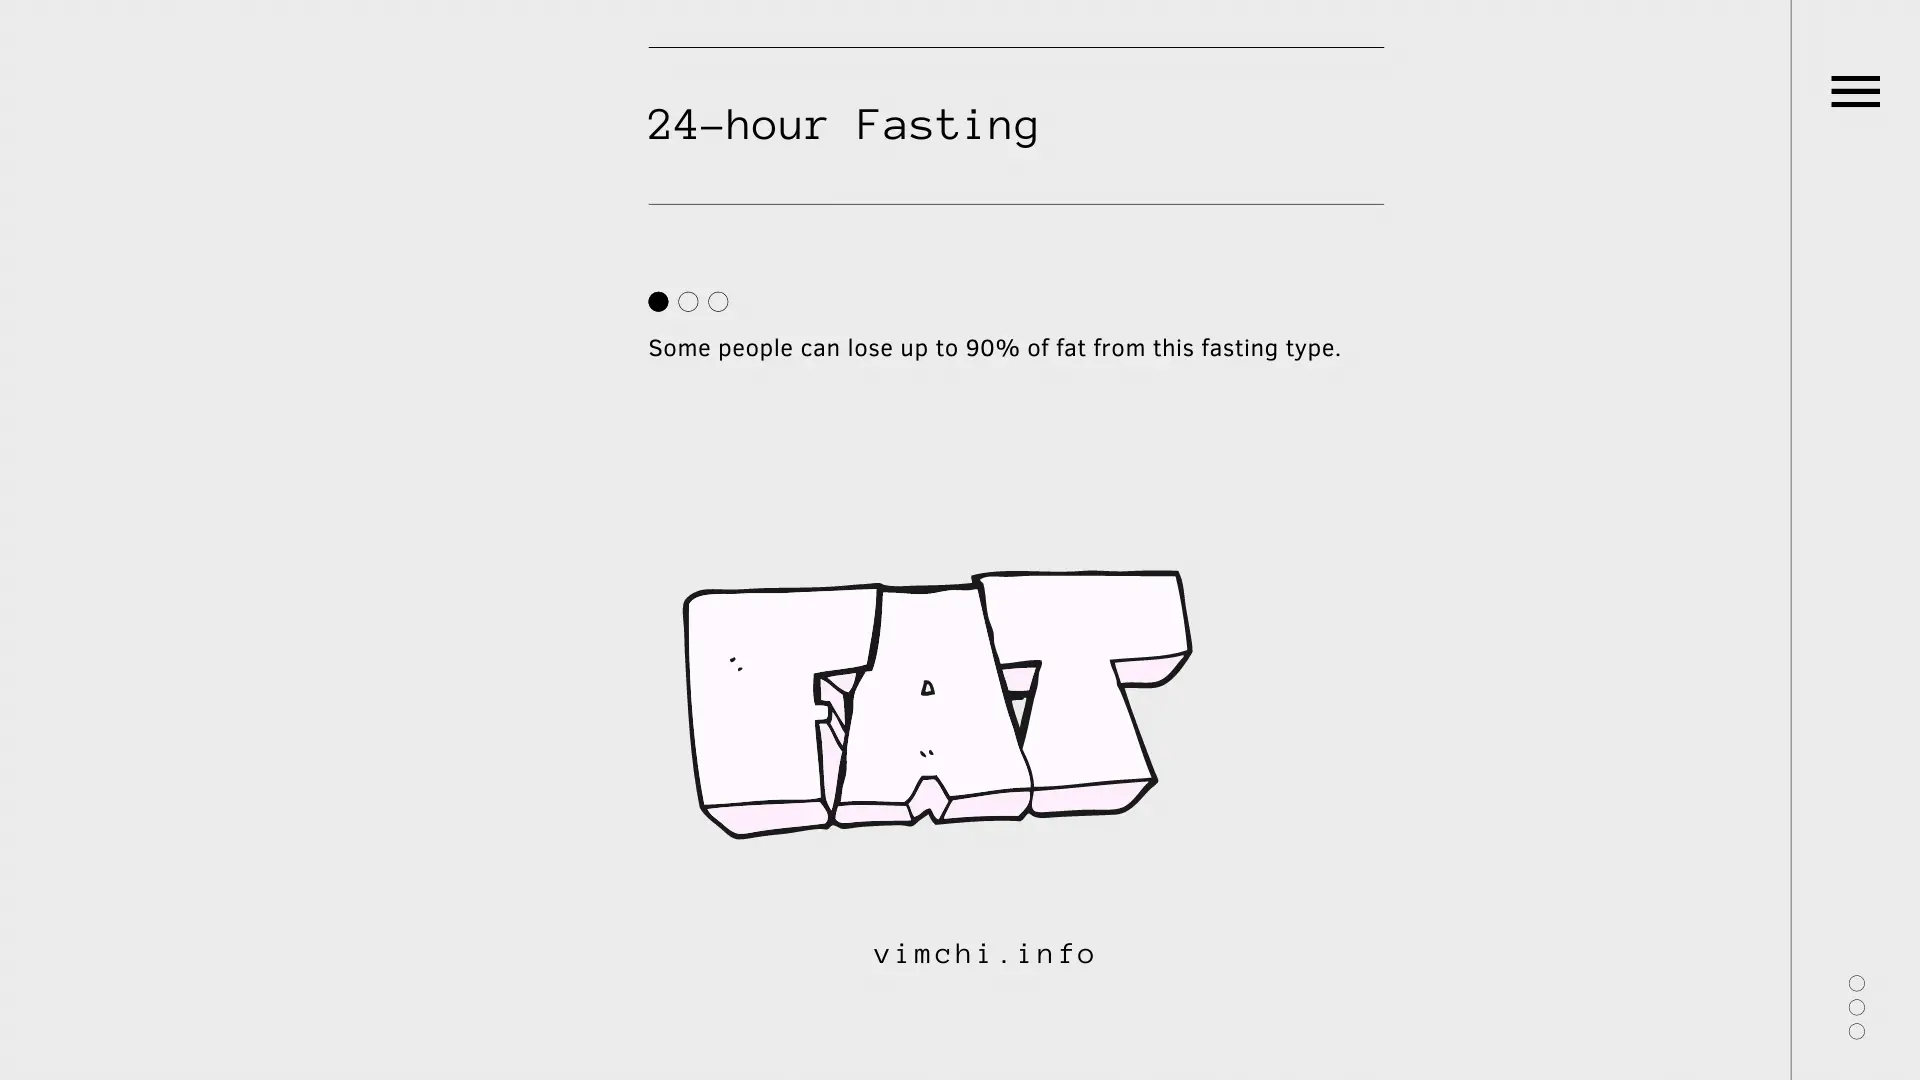 How much weight can you lose in a 24 hour fast